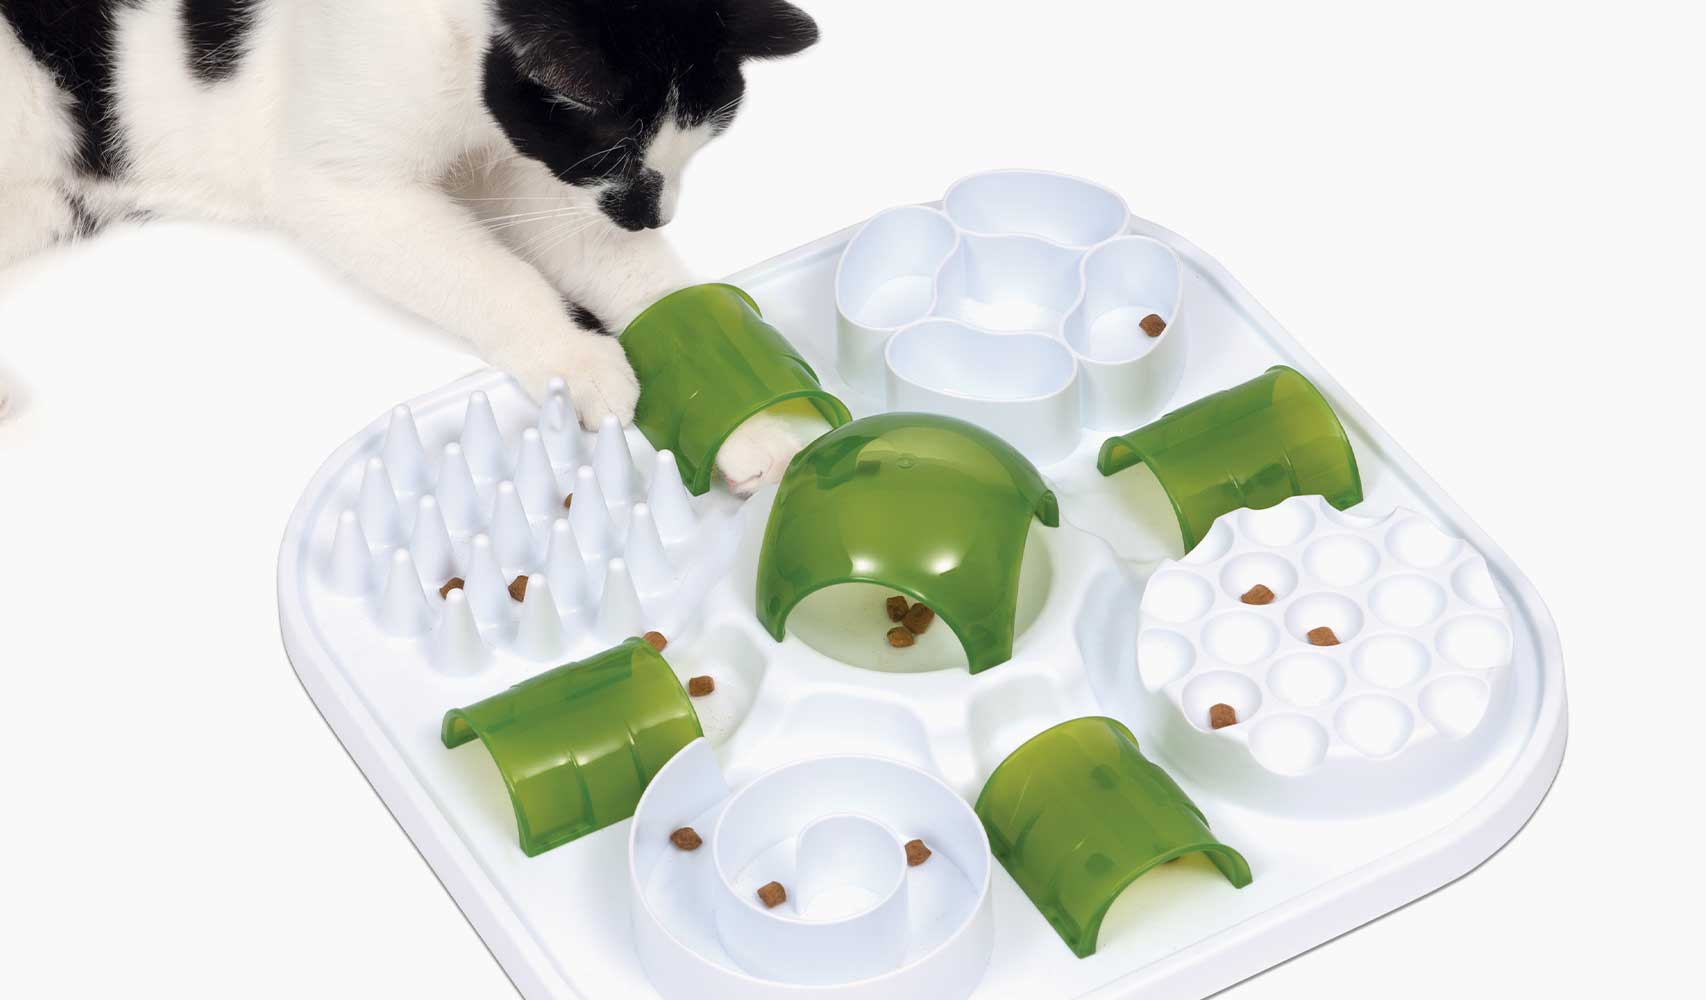 Interactive Cat Therapy Puzzles, Puzzle Feeders For Cats, Slow